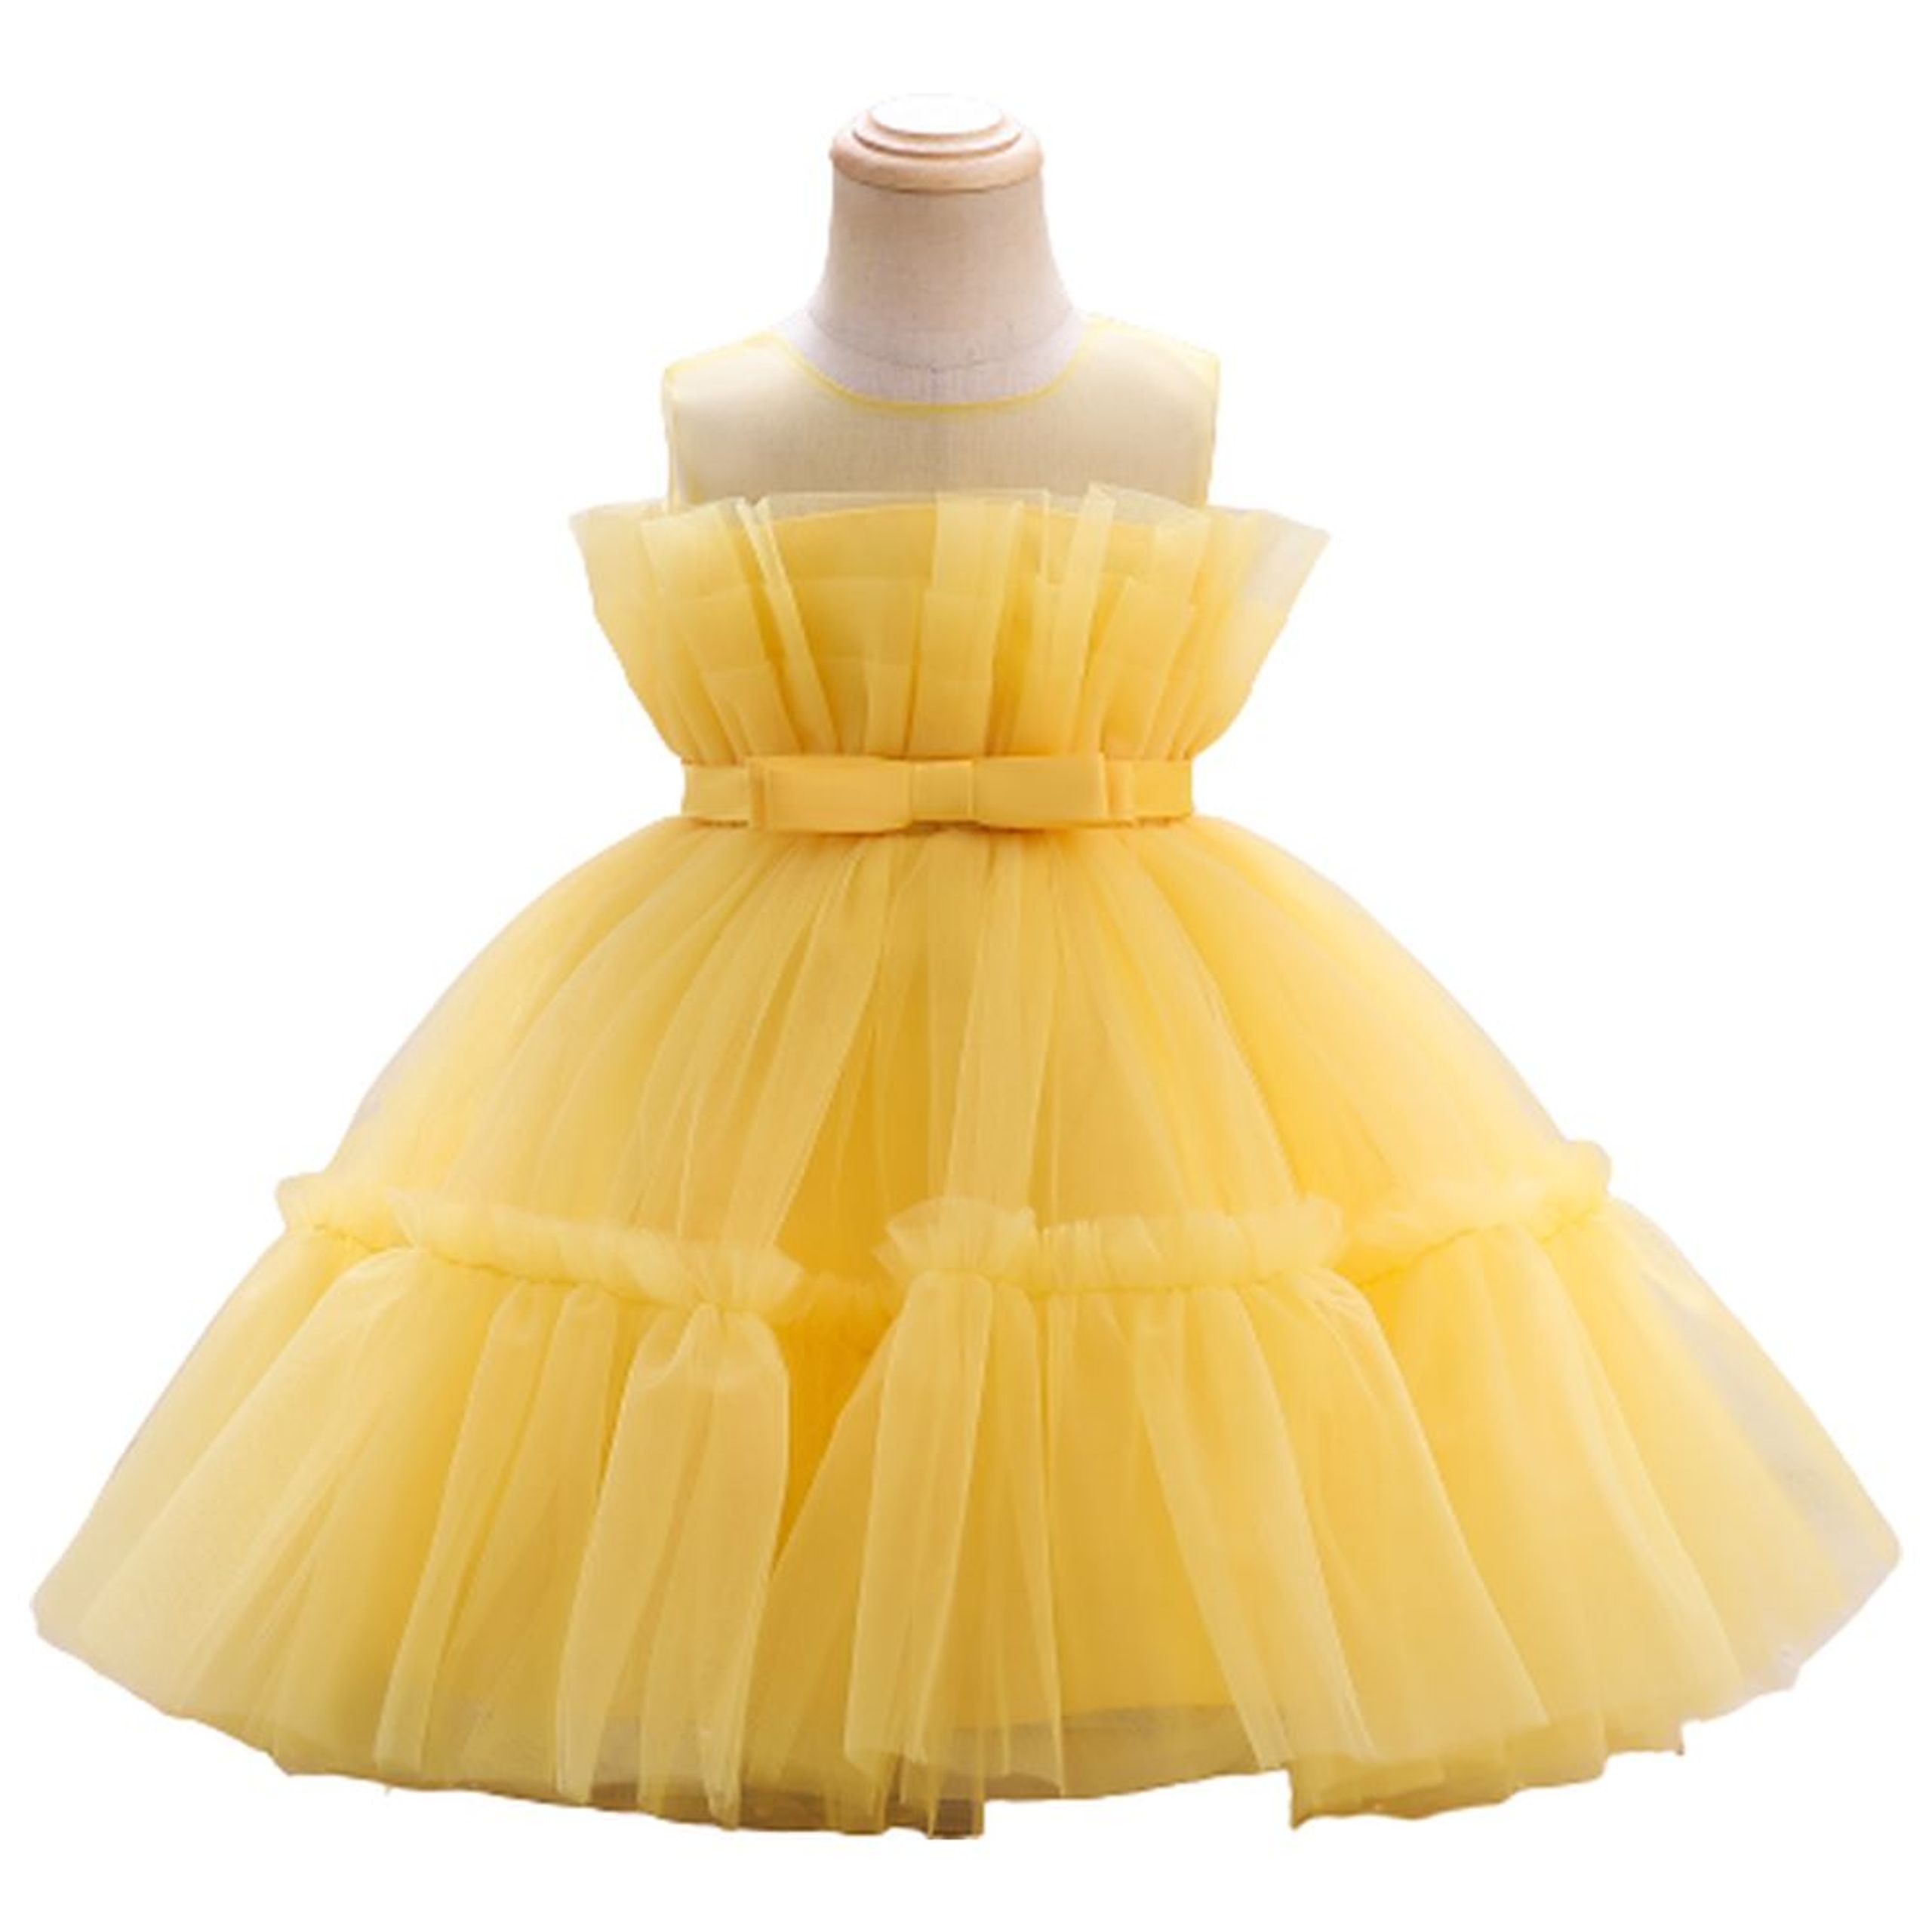 Girl's Party Wear dresses | Frocks | Fashion Dresses for baby Girls ...